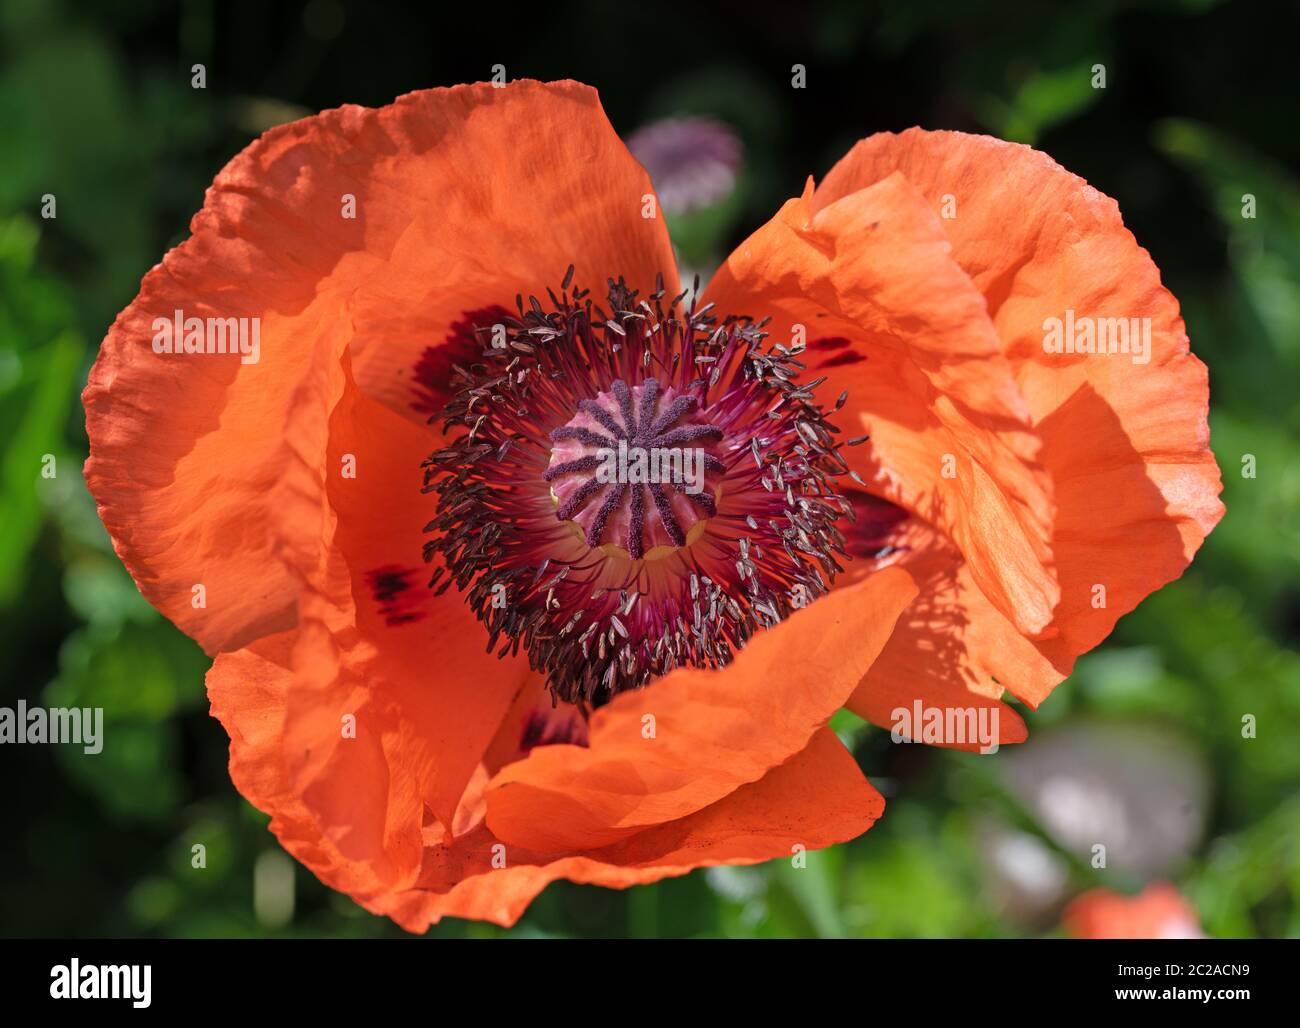 Flowering Turkish poppy, Papaver orientale, in a close-up Stock Photo